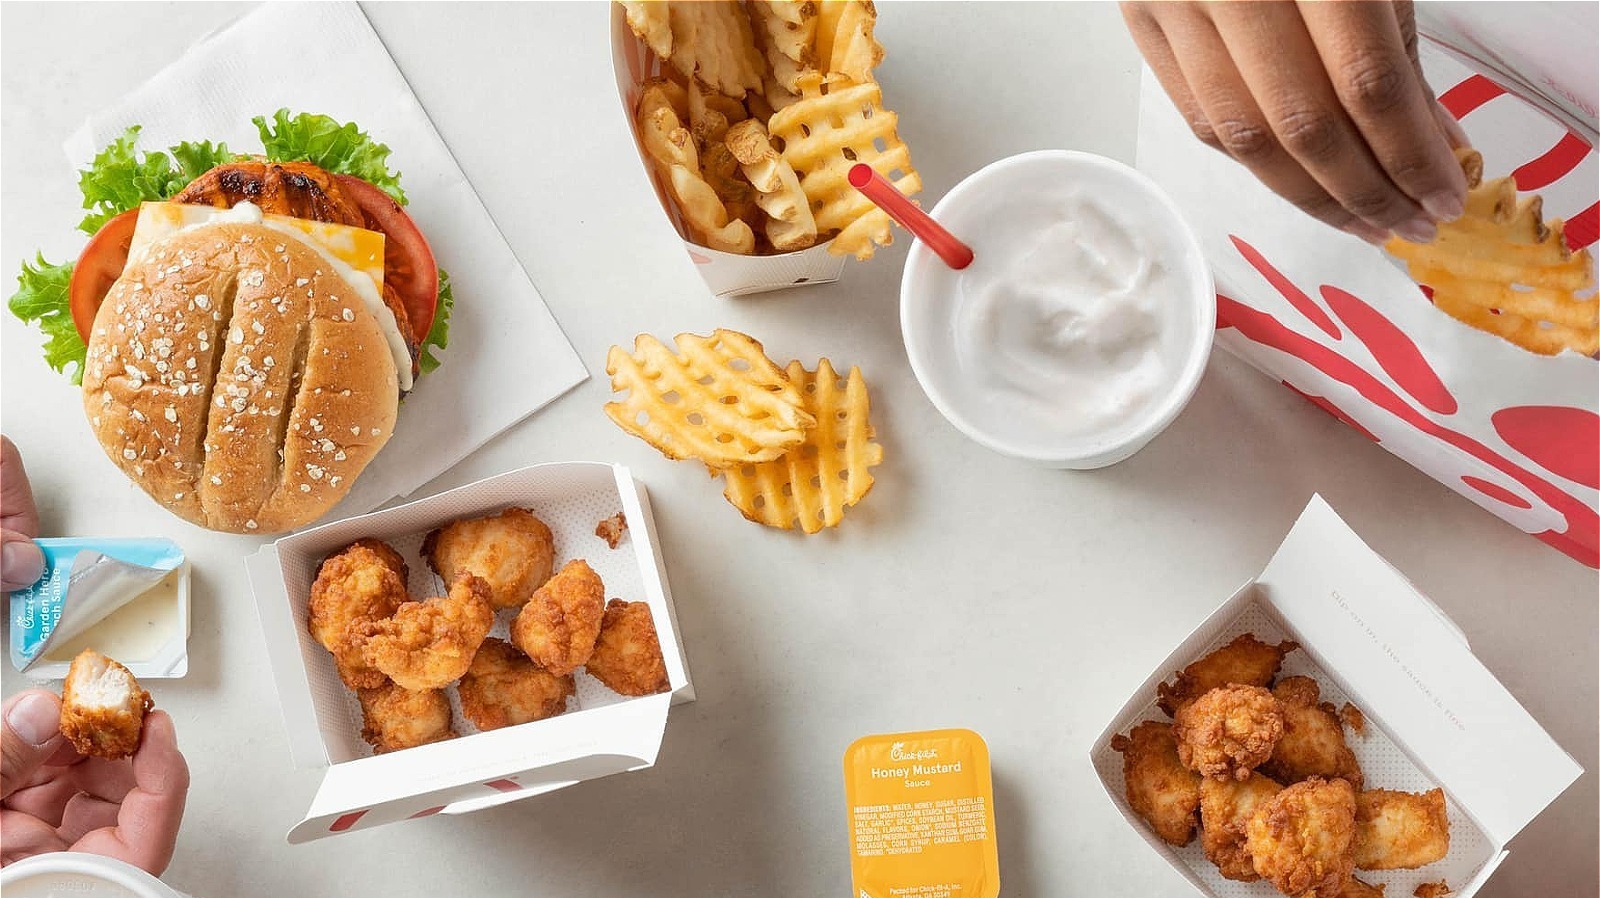 The Most Expensive Items You Ll Find On The Chick Fil A Menu